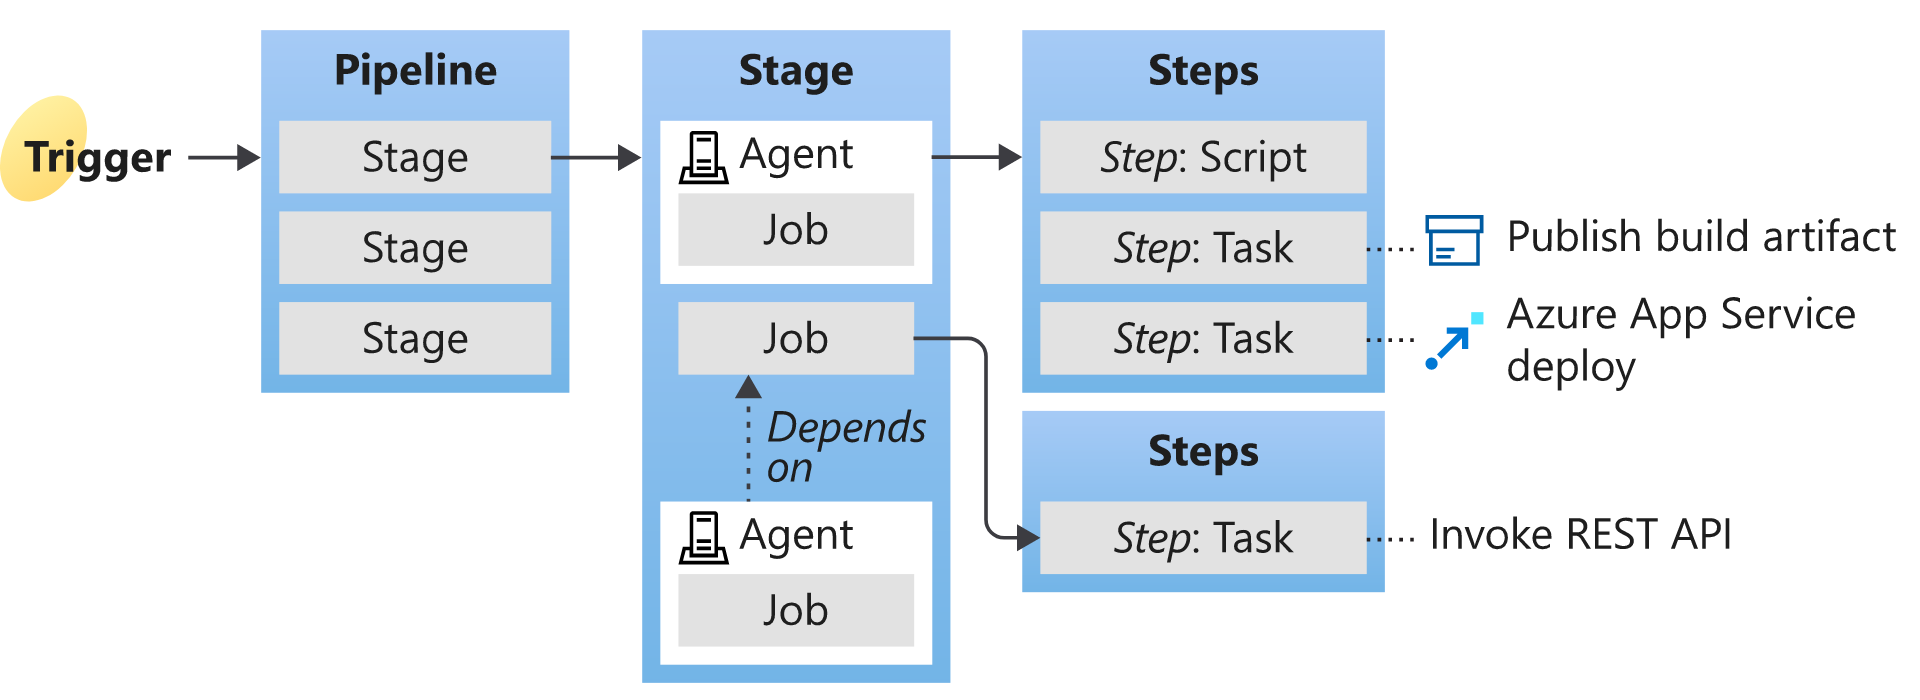 Diagram showing Key pipeline terms with a trigger action, starting the pipeline with multiple stages, using various jobs and tasks to create a build artifact, and start the deployment.